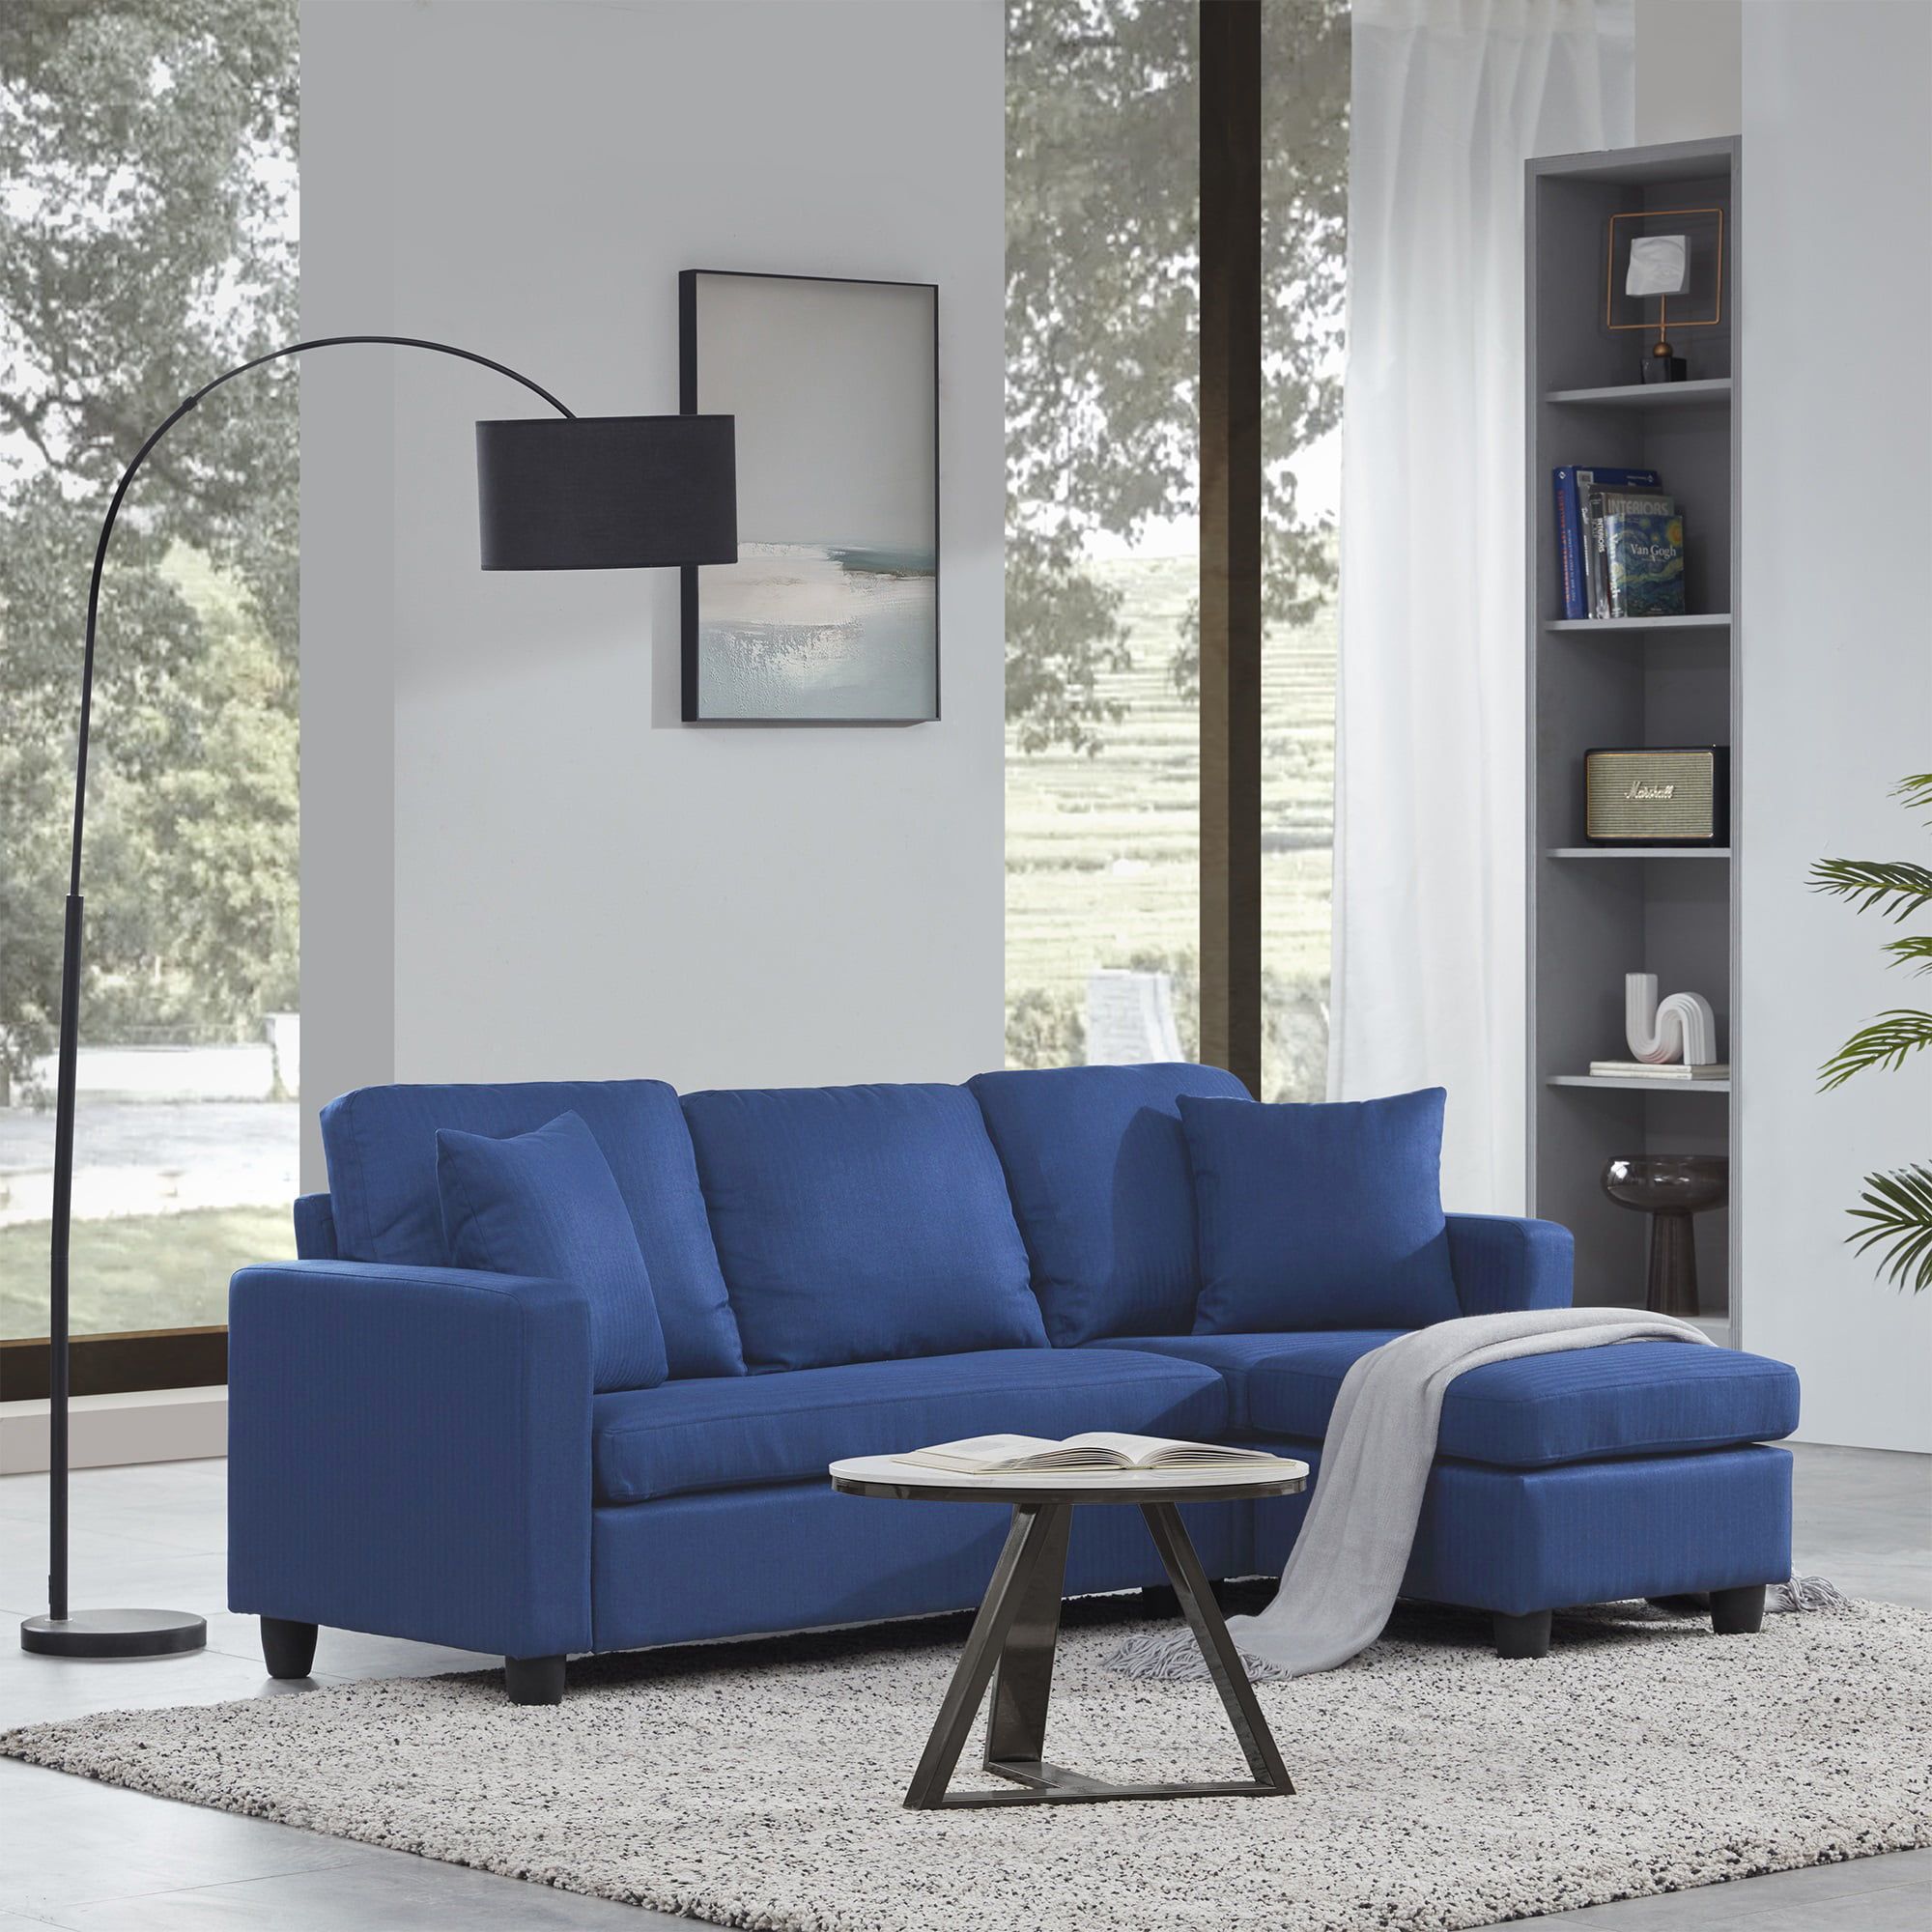 Belleze Altera Convertible Sectional Sofa, Modern Linen Fabric L Shaped  Couch 3 Seat With Reversible Chaise For Small Space, Navy Blue – Walmart With Modern Blue Linen Sofas (View 15 of 15)